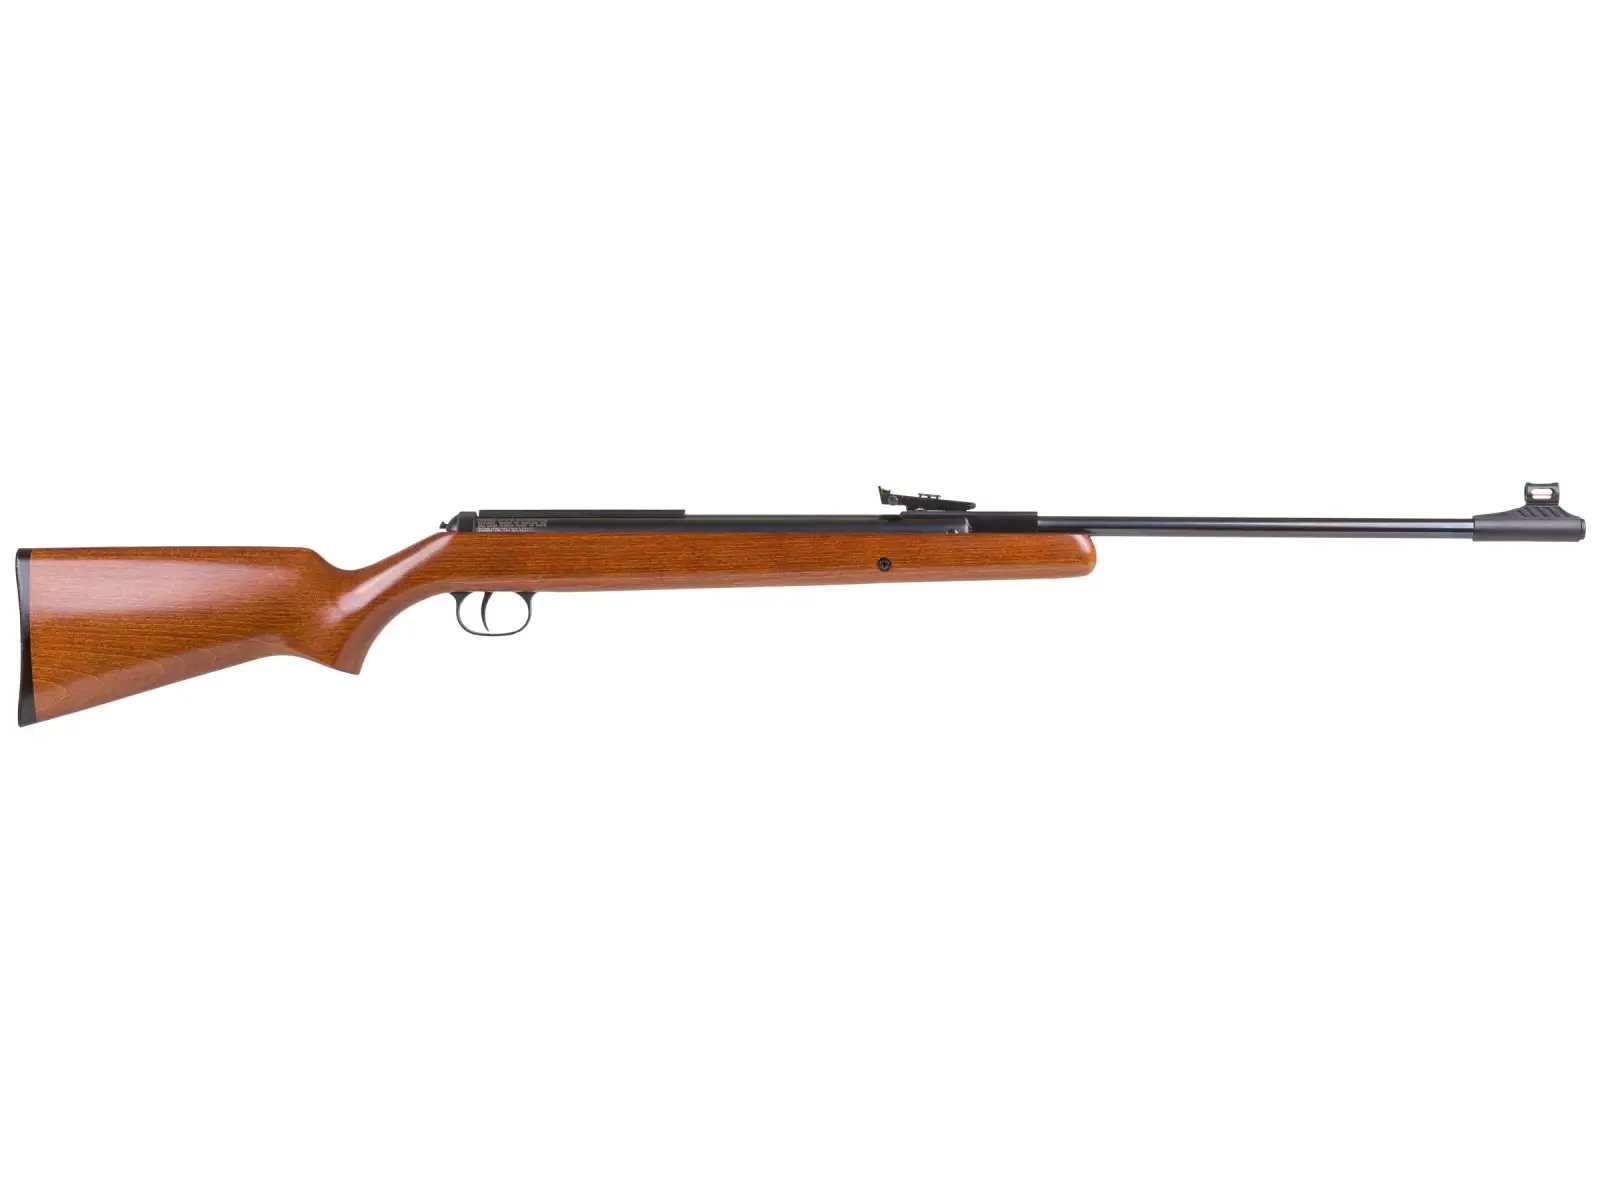 rws34 1 Best Air Rifles Under $300 (Reviews and Buying Guide 2022)